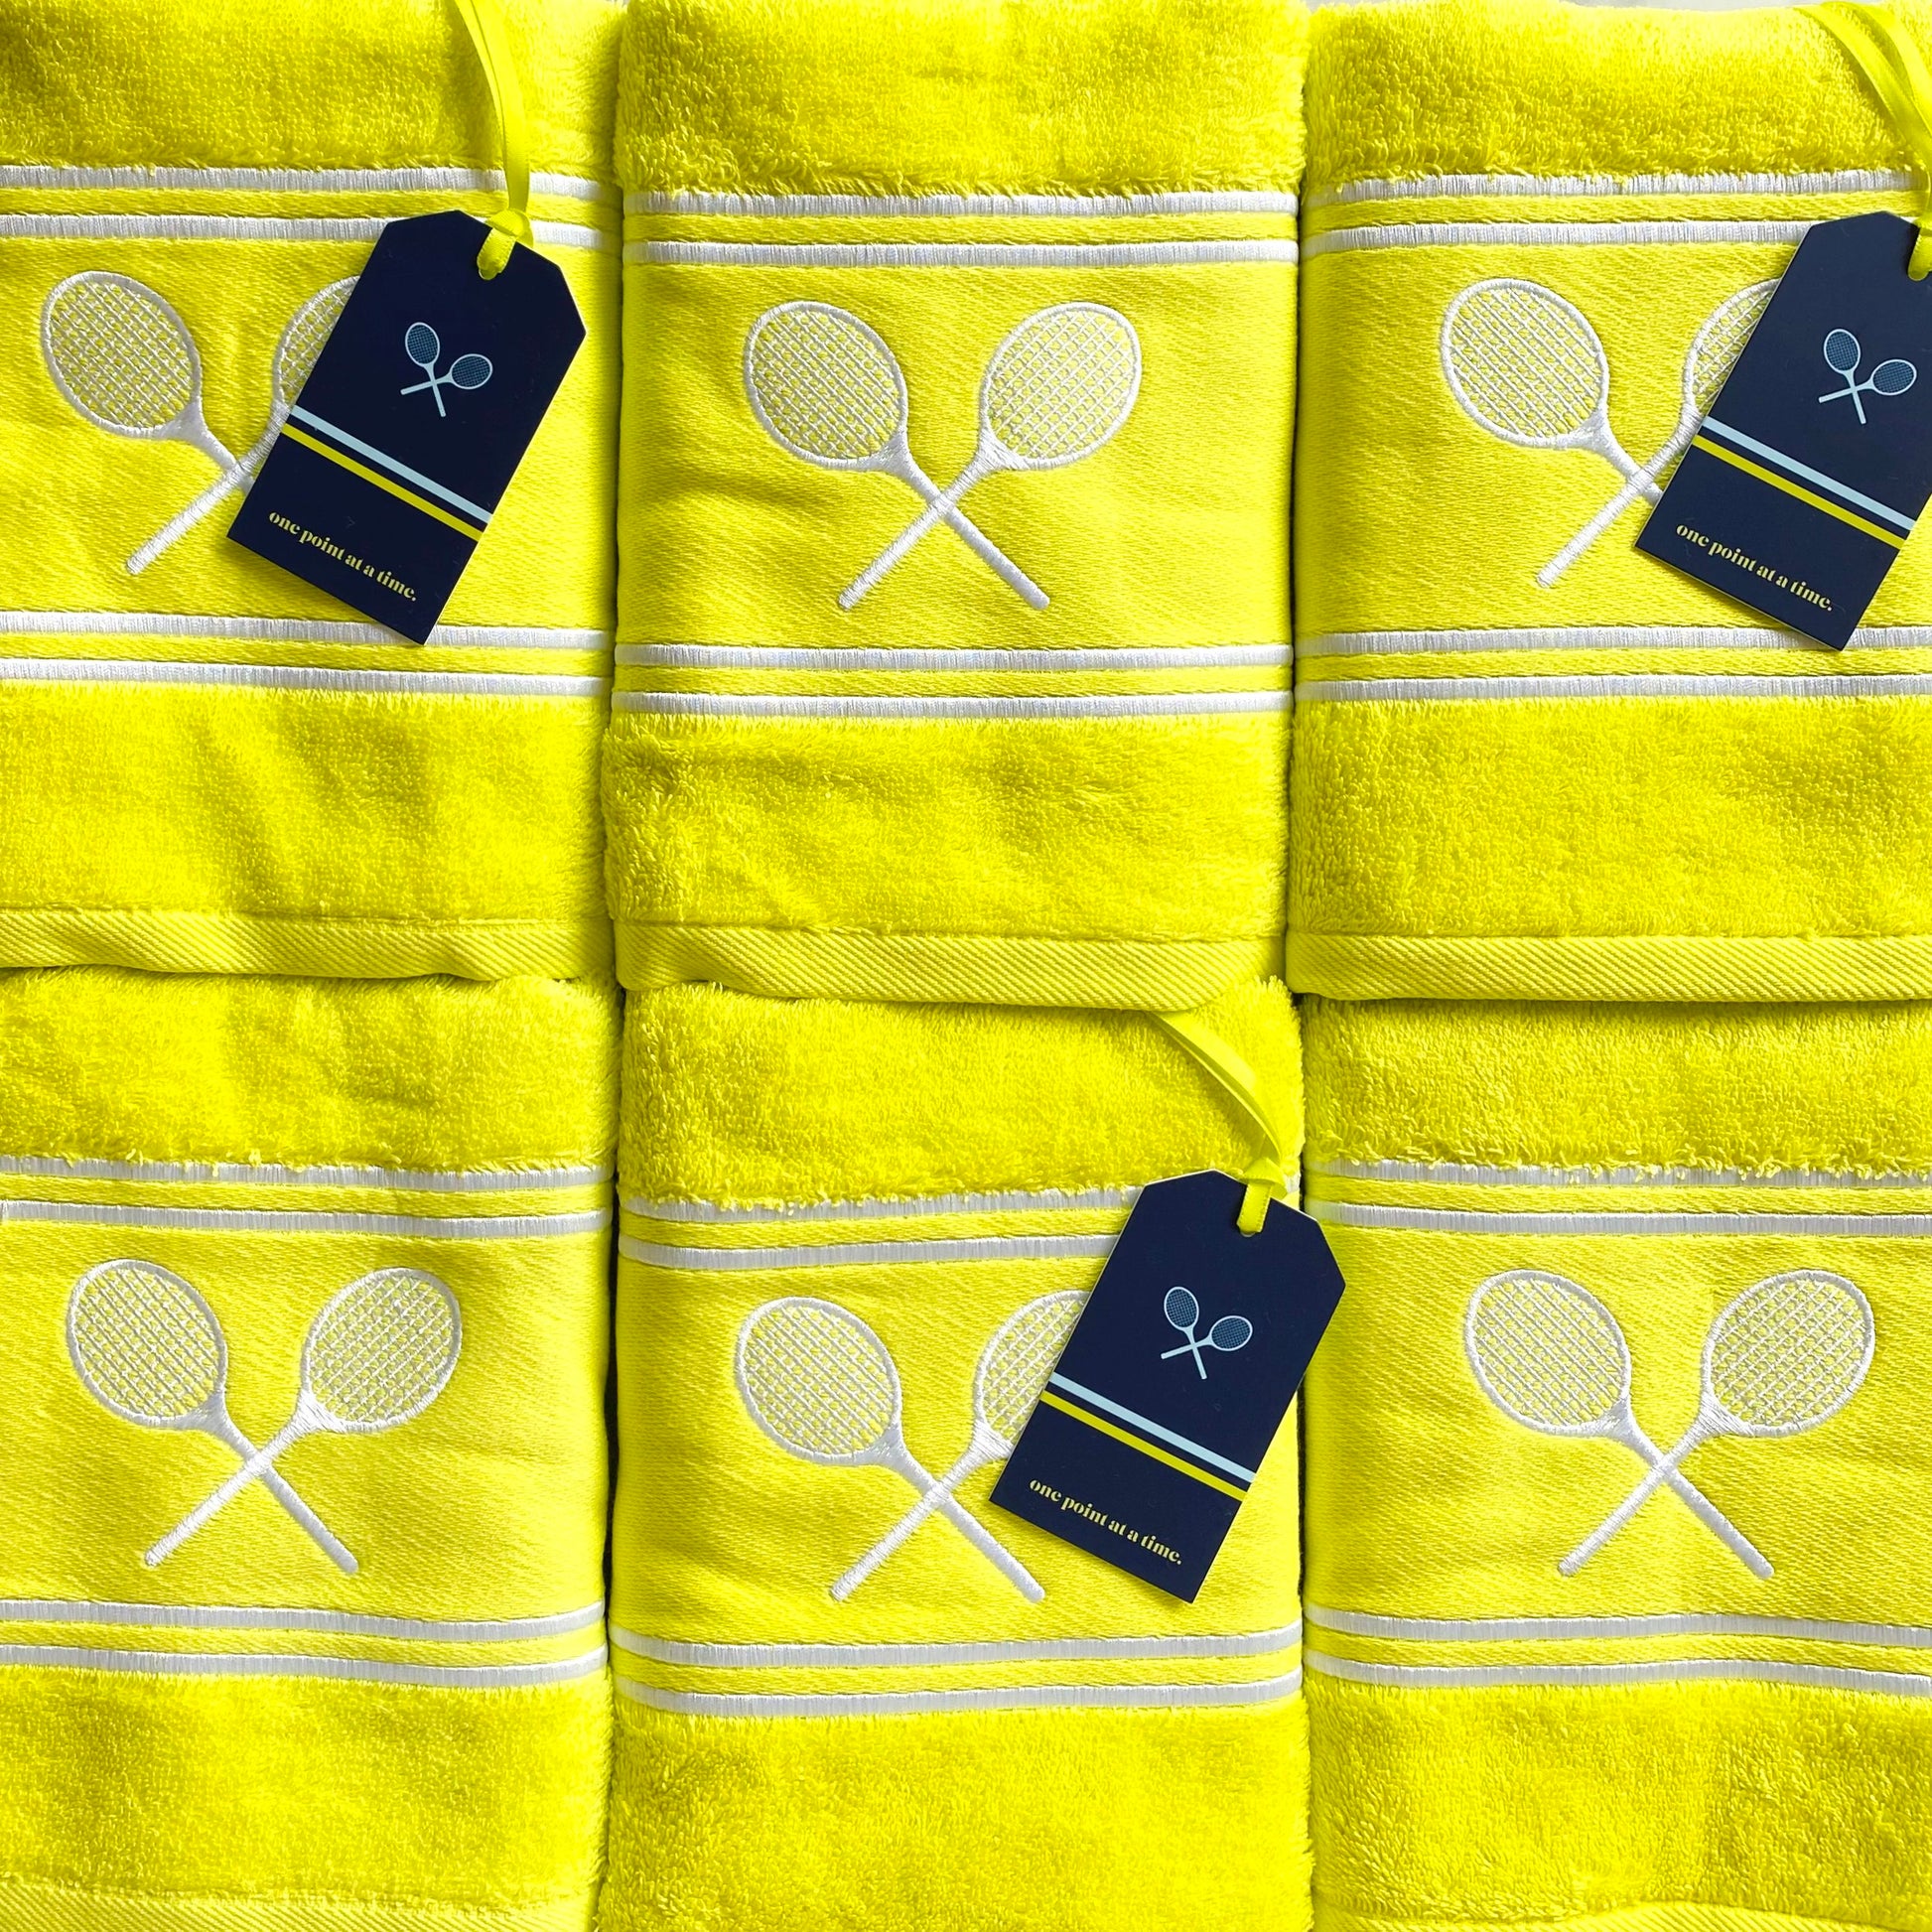 Matchtime Tennis Towel—Yellow – courtgirl.